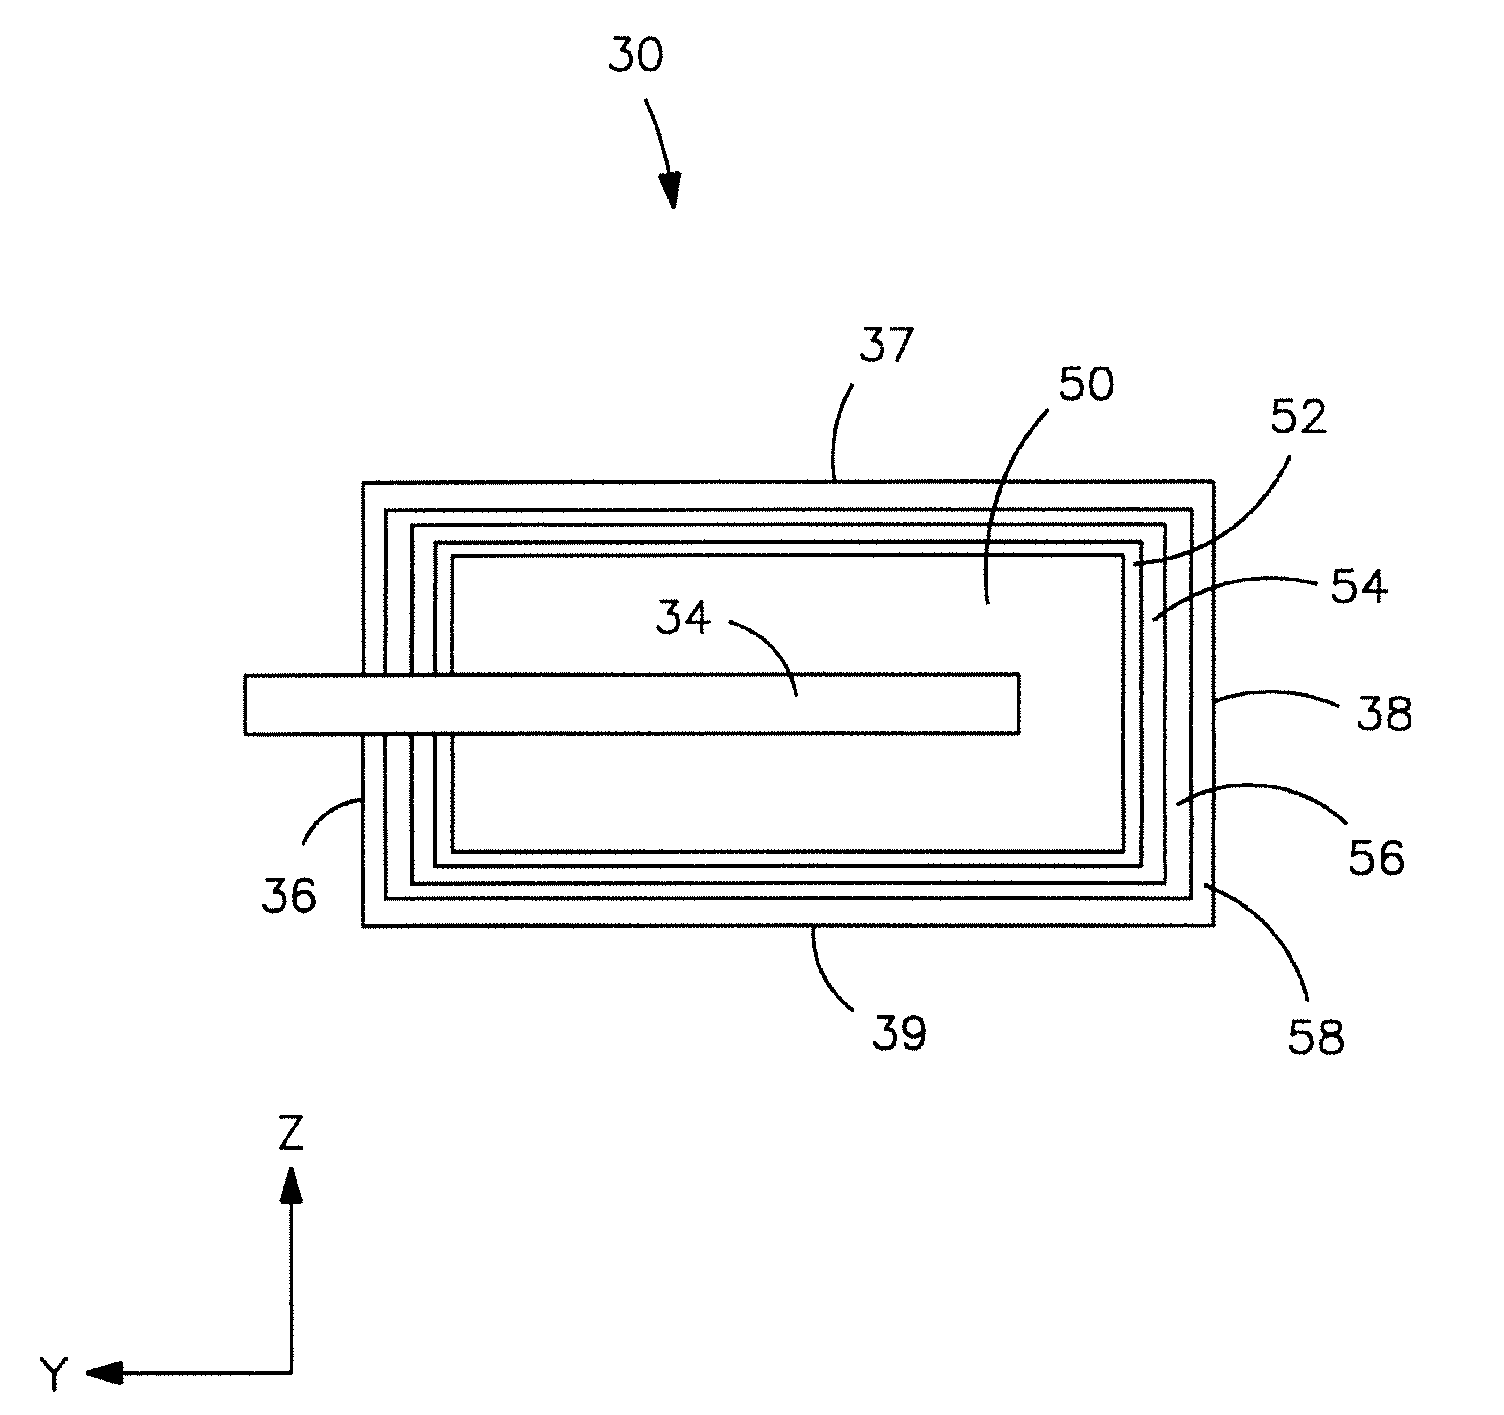 Sintered anode pellet treated with a surfactant for use in an electrolytic capacitor